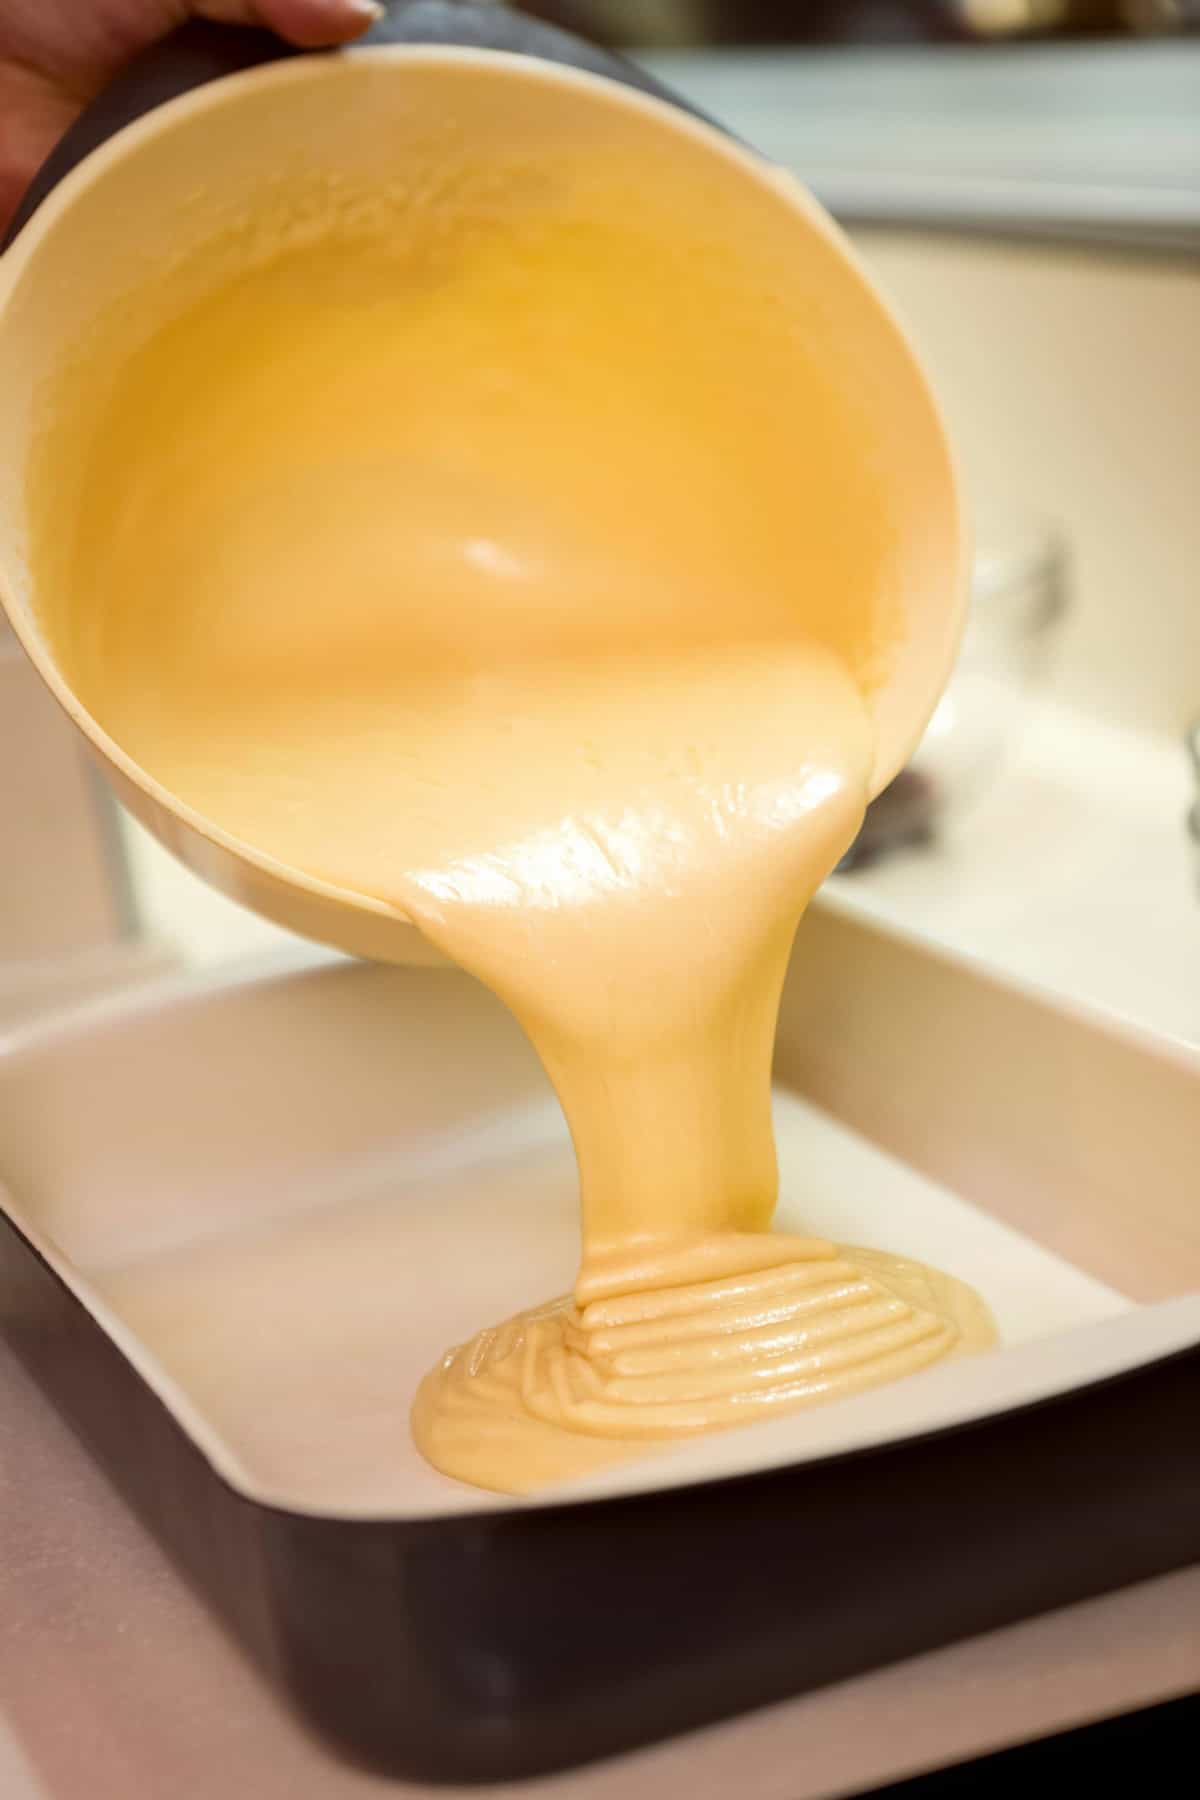 Cake batter being poured into a square cake pan.